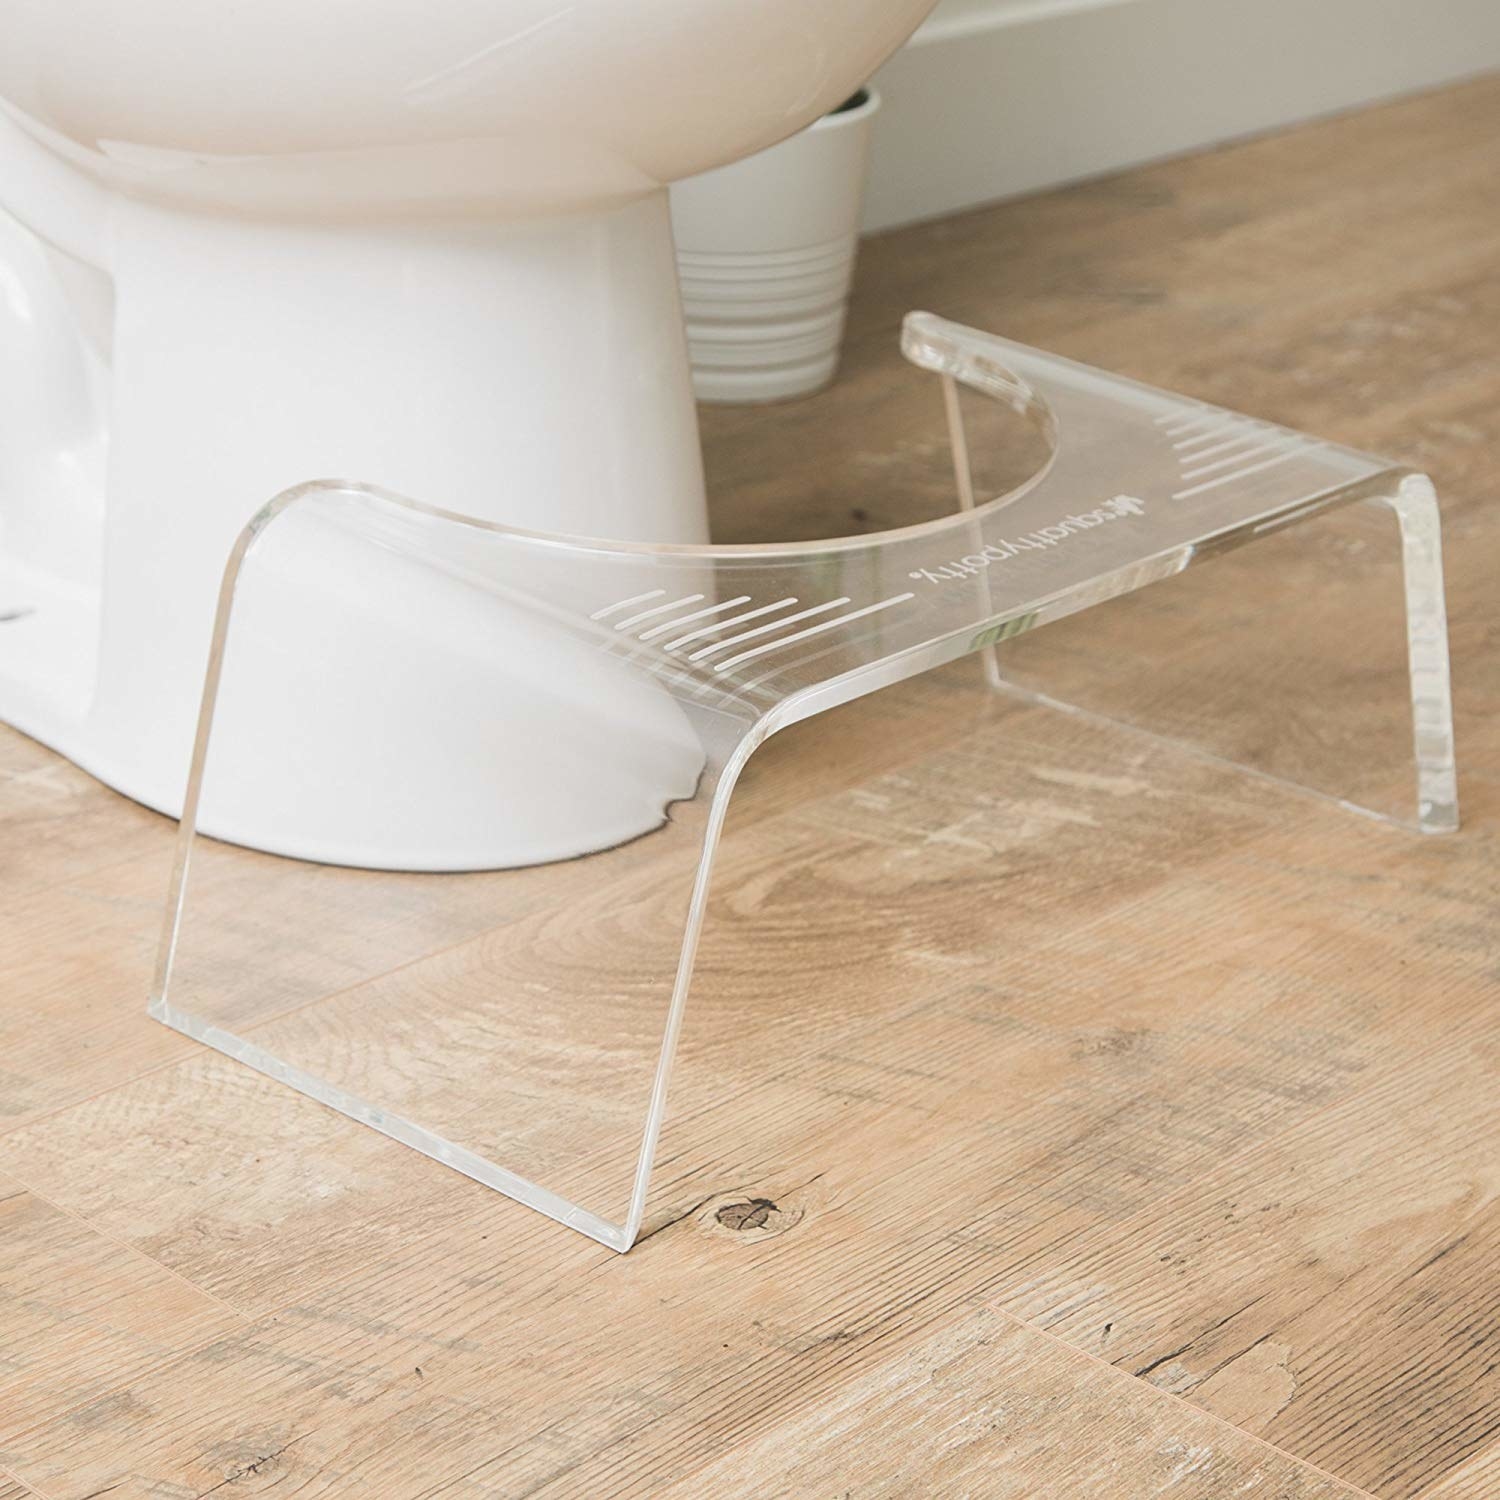 clear stool in front of a toilet